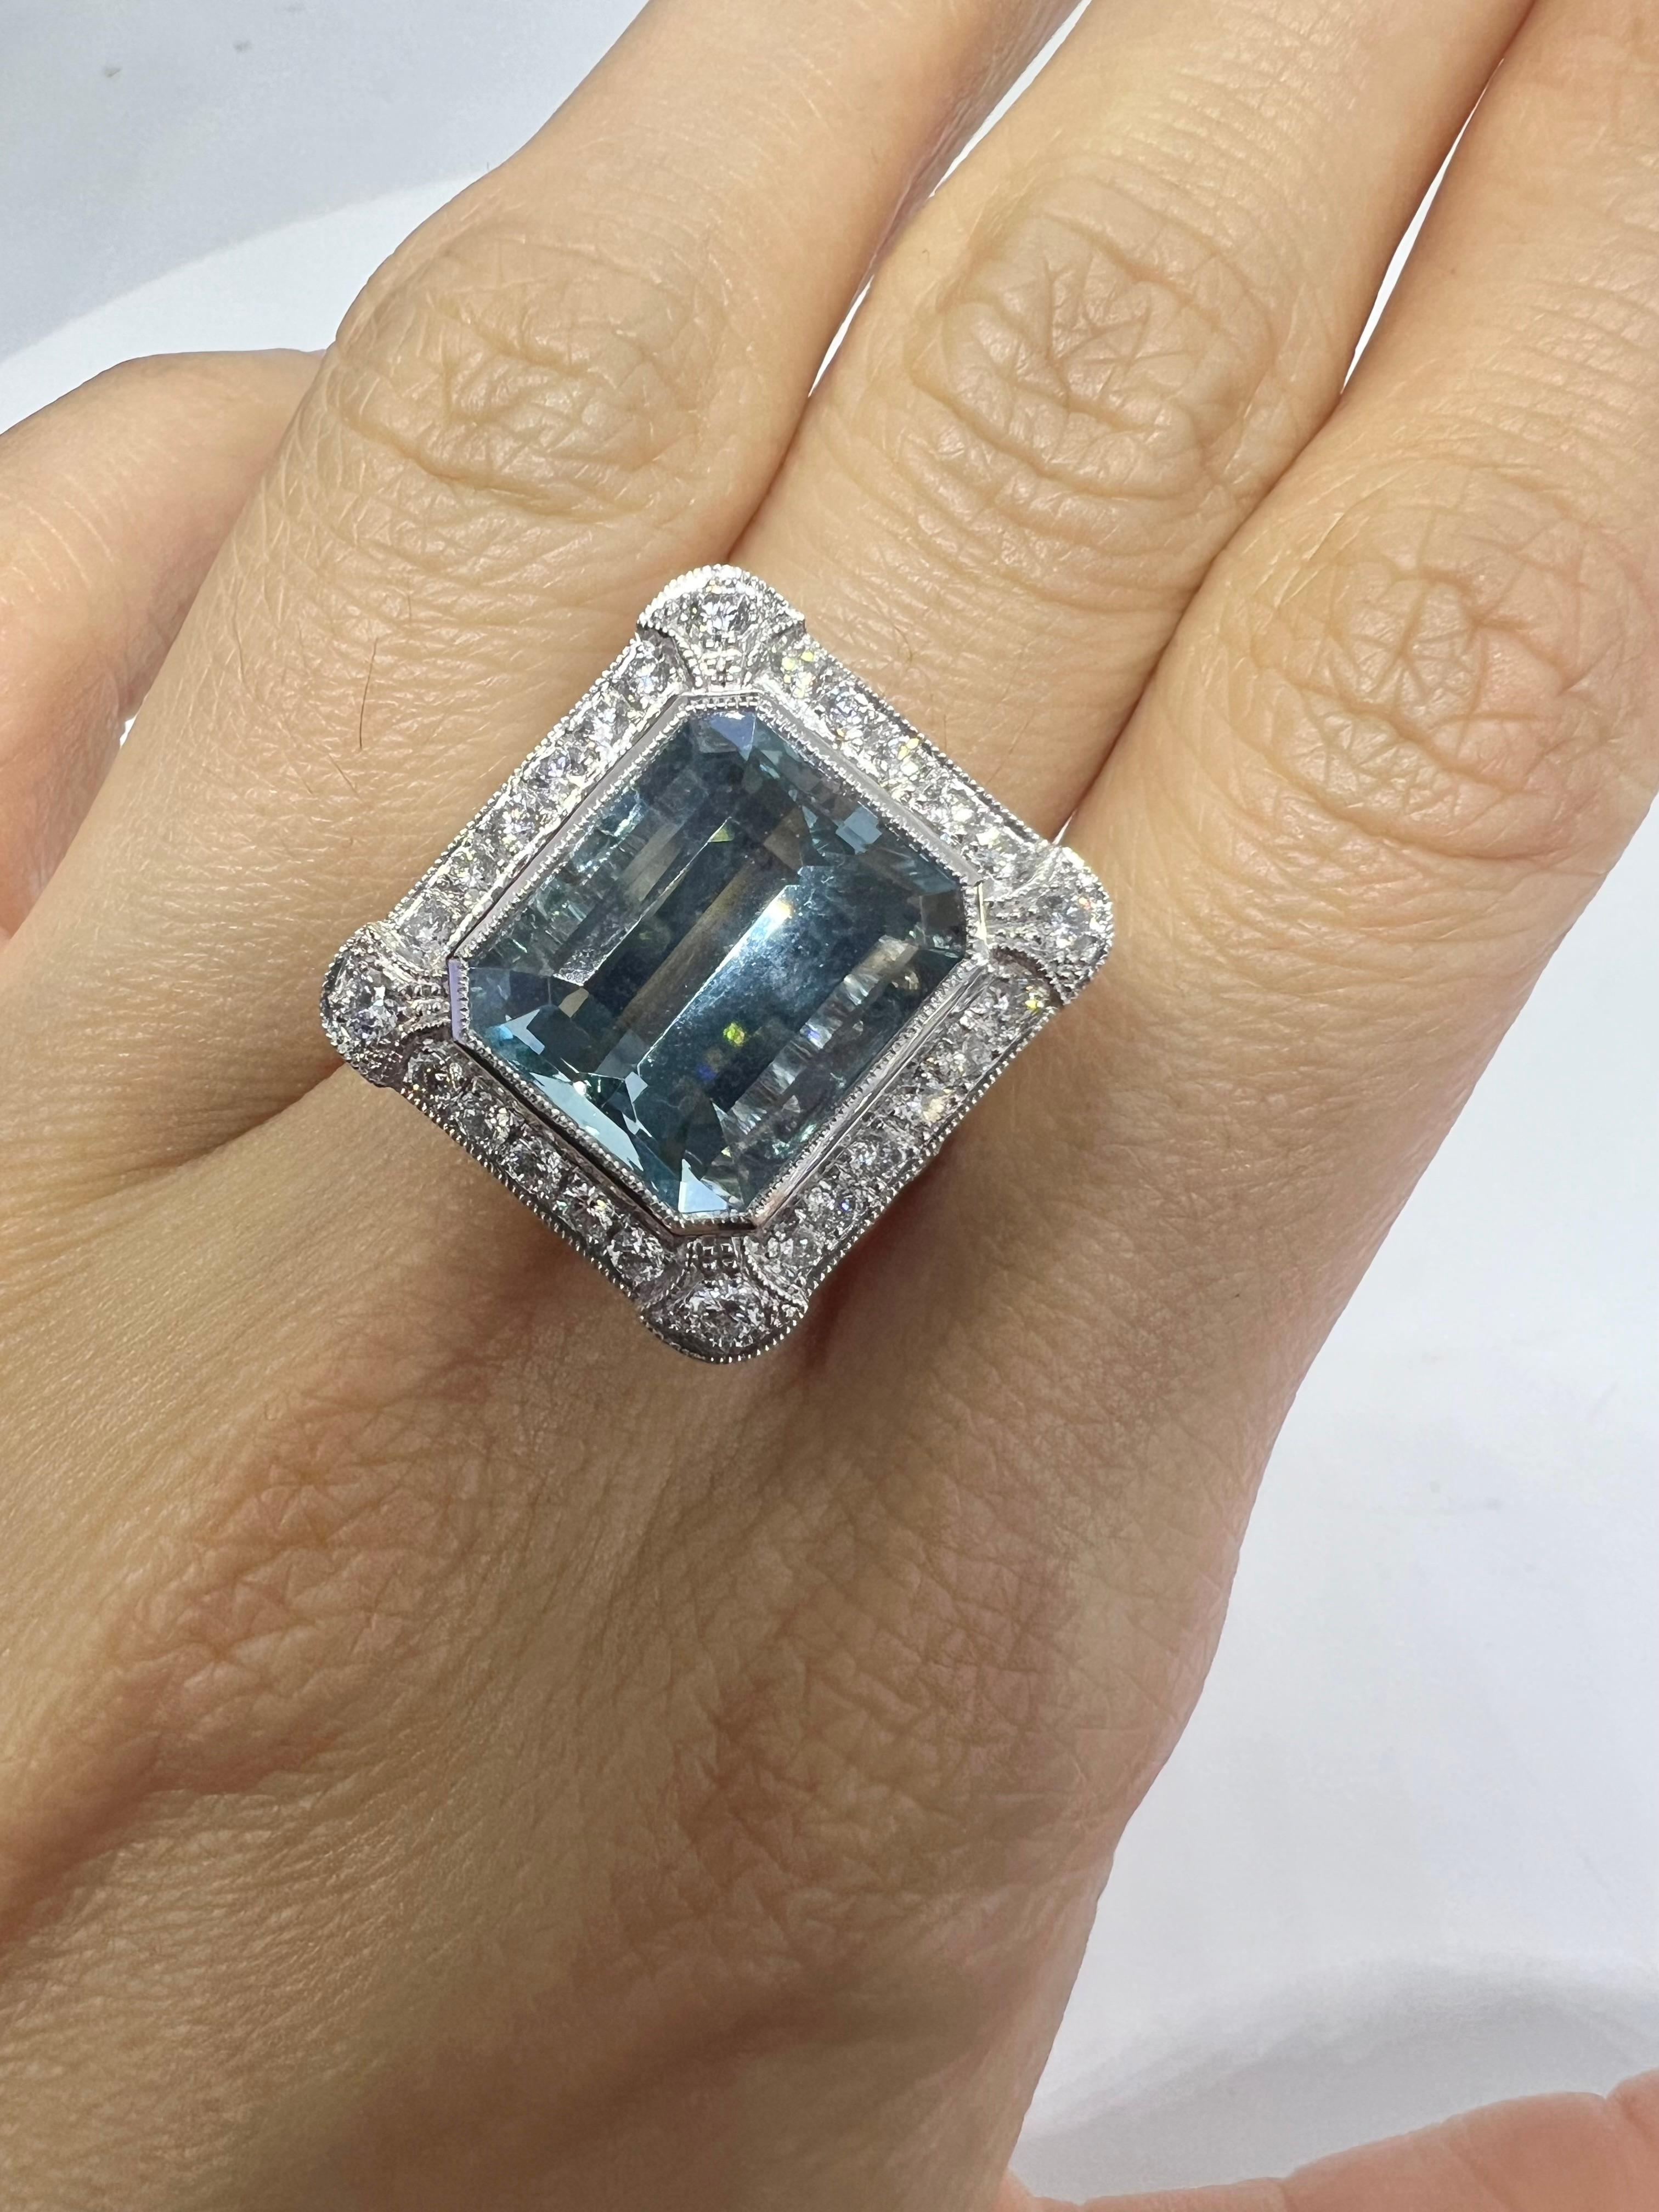 Platinum ring with 7.70 carat aquamarine and 1.51 carat diamond.

Sophia D by Joseph Dardashti LTD has been known worldwide for 35 years and are inspired by classic Art Deco design that merges with modern manufacturing techniques.